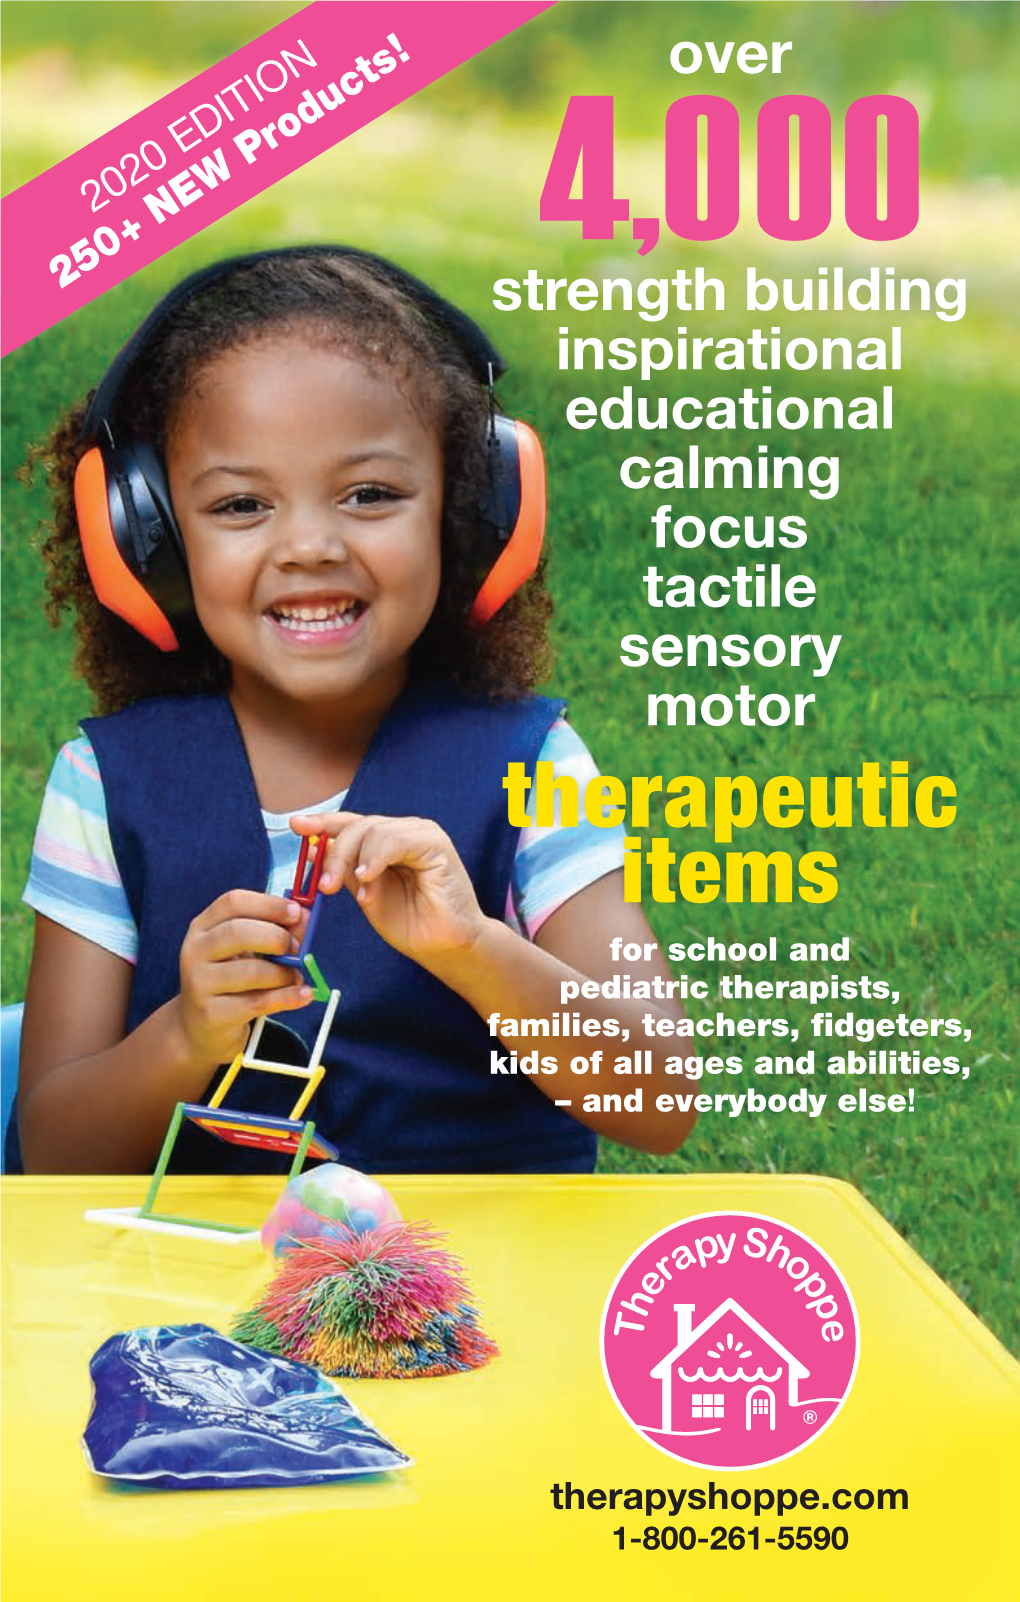 Therapeutic Items for School and Pediatric Therapists, Families, Teachers, Fidgeters, Kids of All Ages and Abilities, – and Everybody Else!